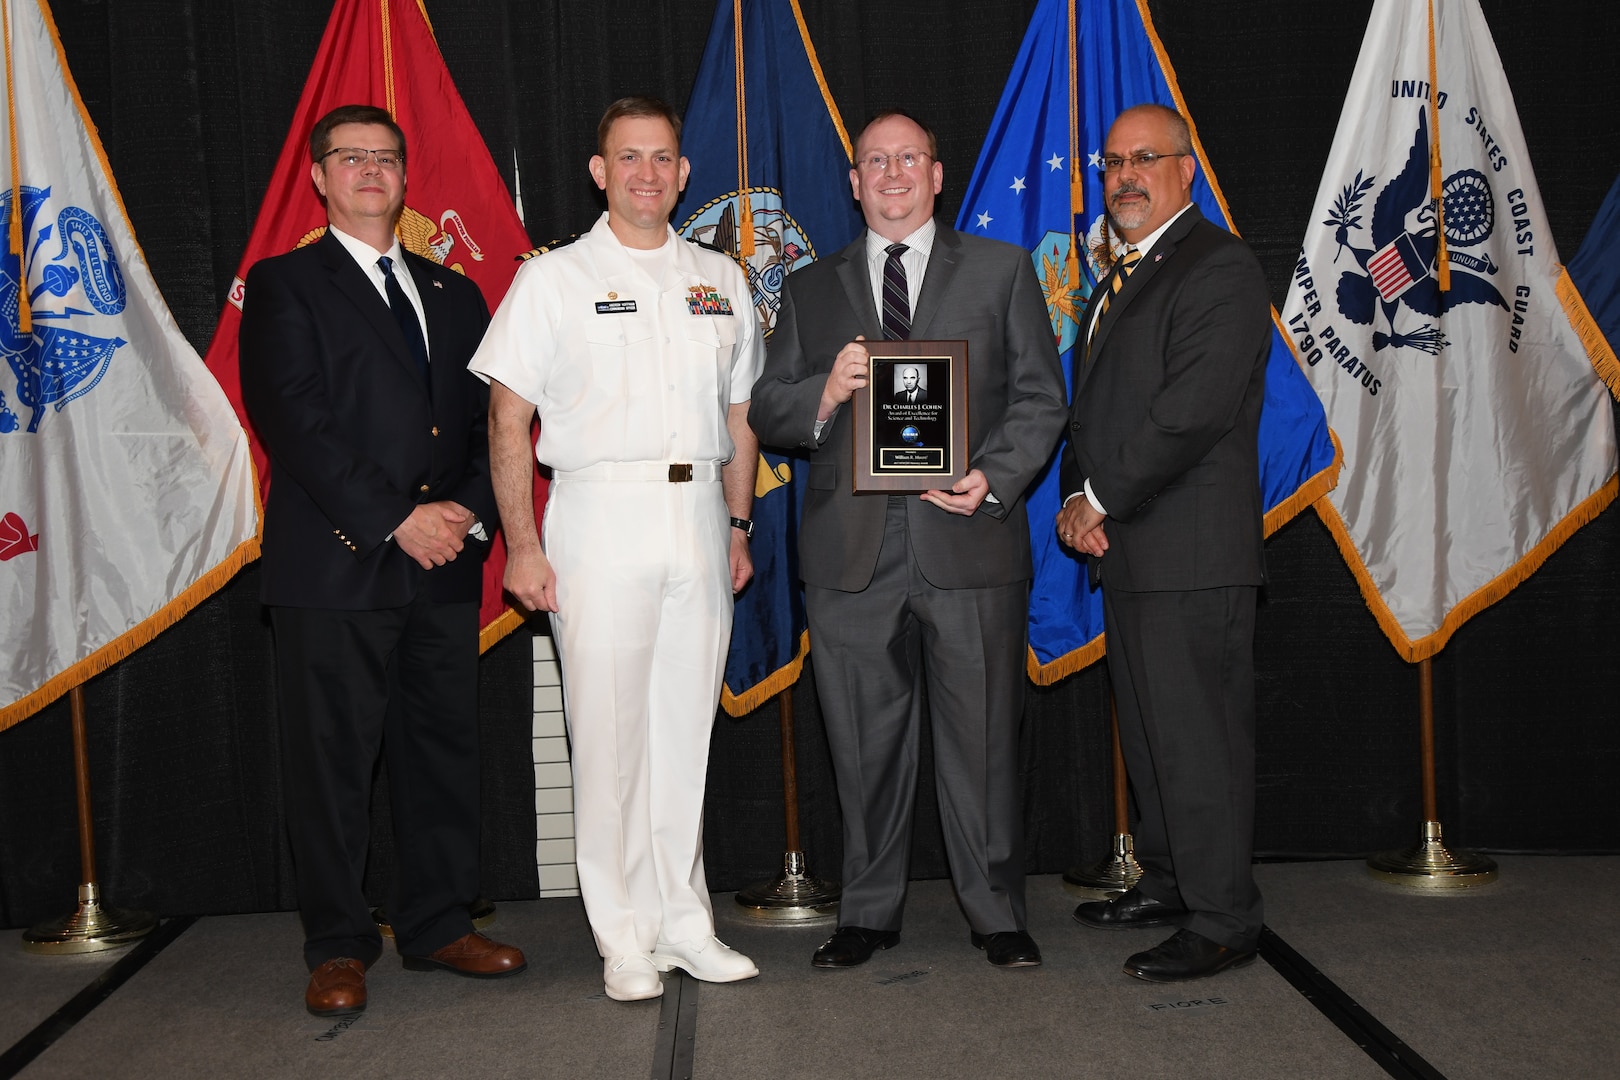 IMAGE: William Moore is presented the Dr. Charles J. Cohen Award at Naval Surface Warfare Center Dahlgren Division's annual awards ceremony, Apr. 26 at the Fredericksburg Expo and Conference Center.

The award recognizes those who fundamentally impact science or technology with work that also measurably impacts capability.